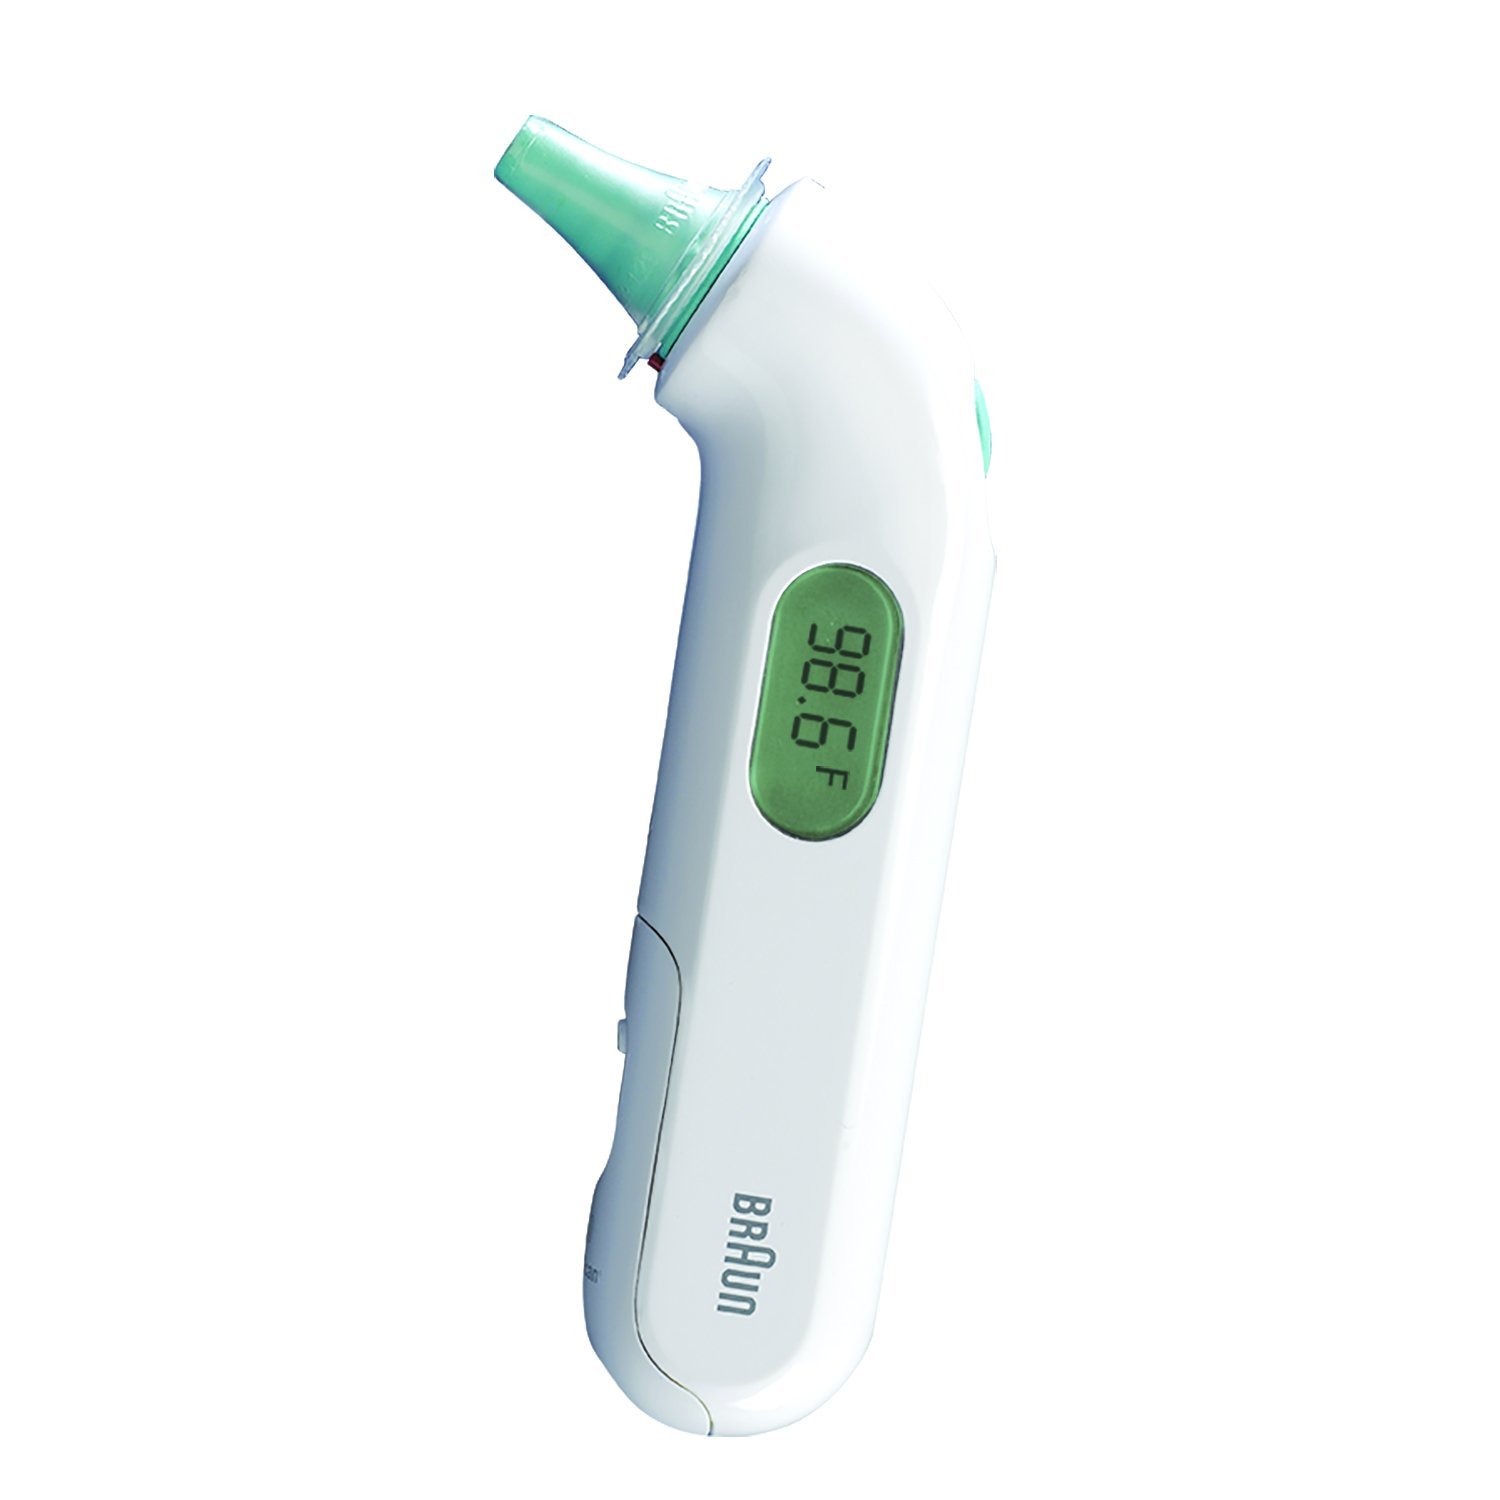 Braun ThermoScan 3 – Digital Ear Thermometer for Kids, [...]